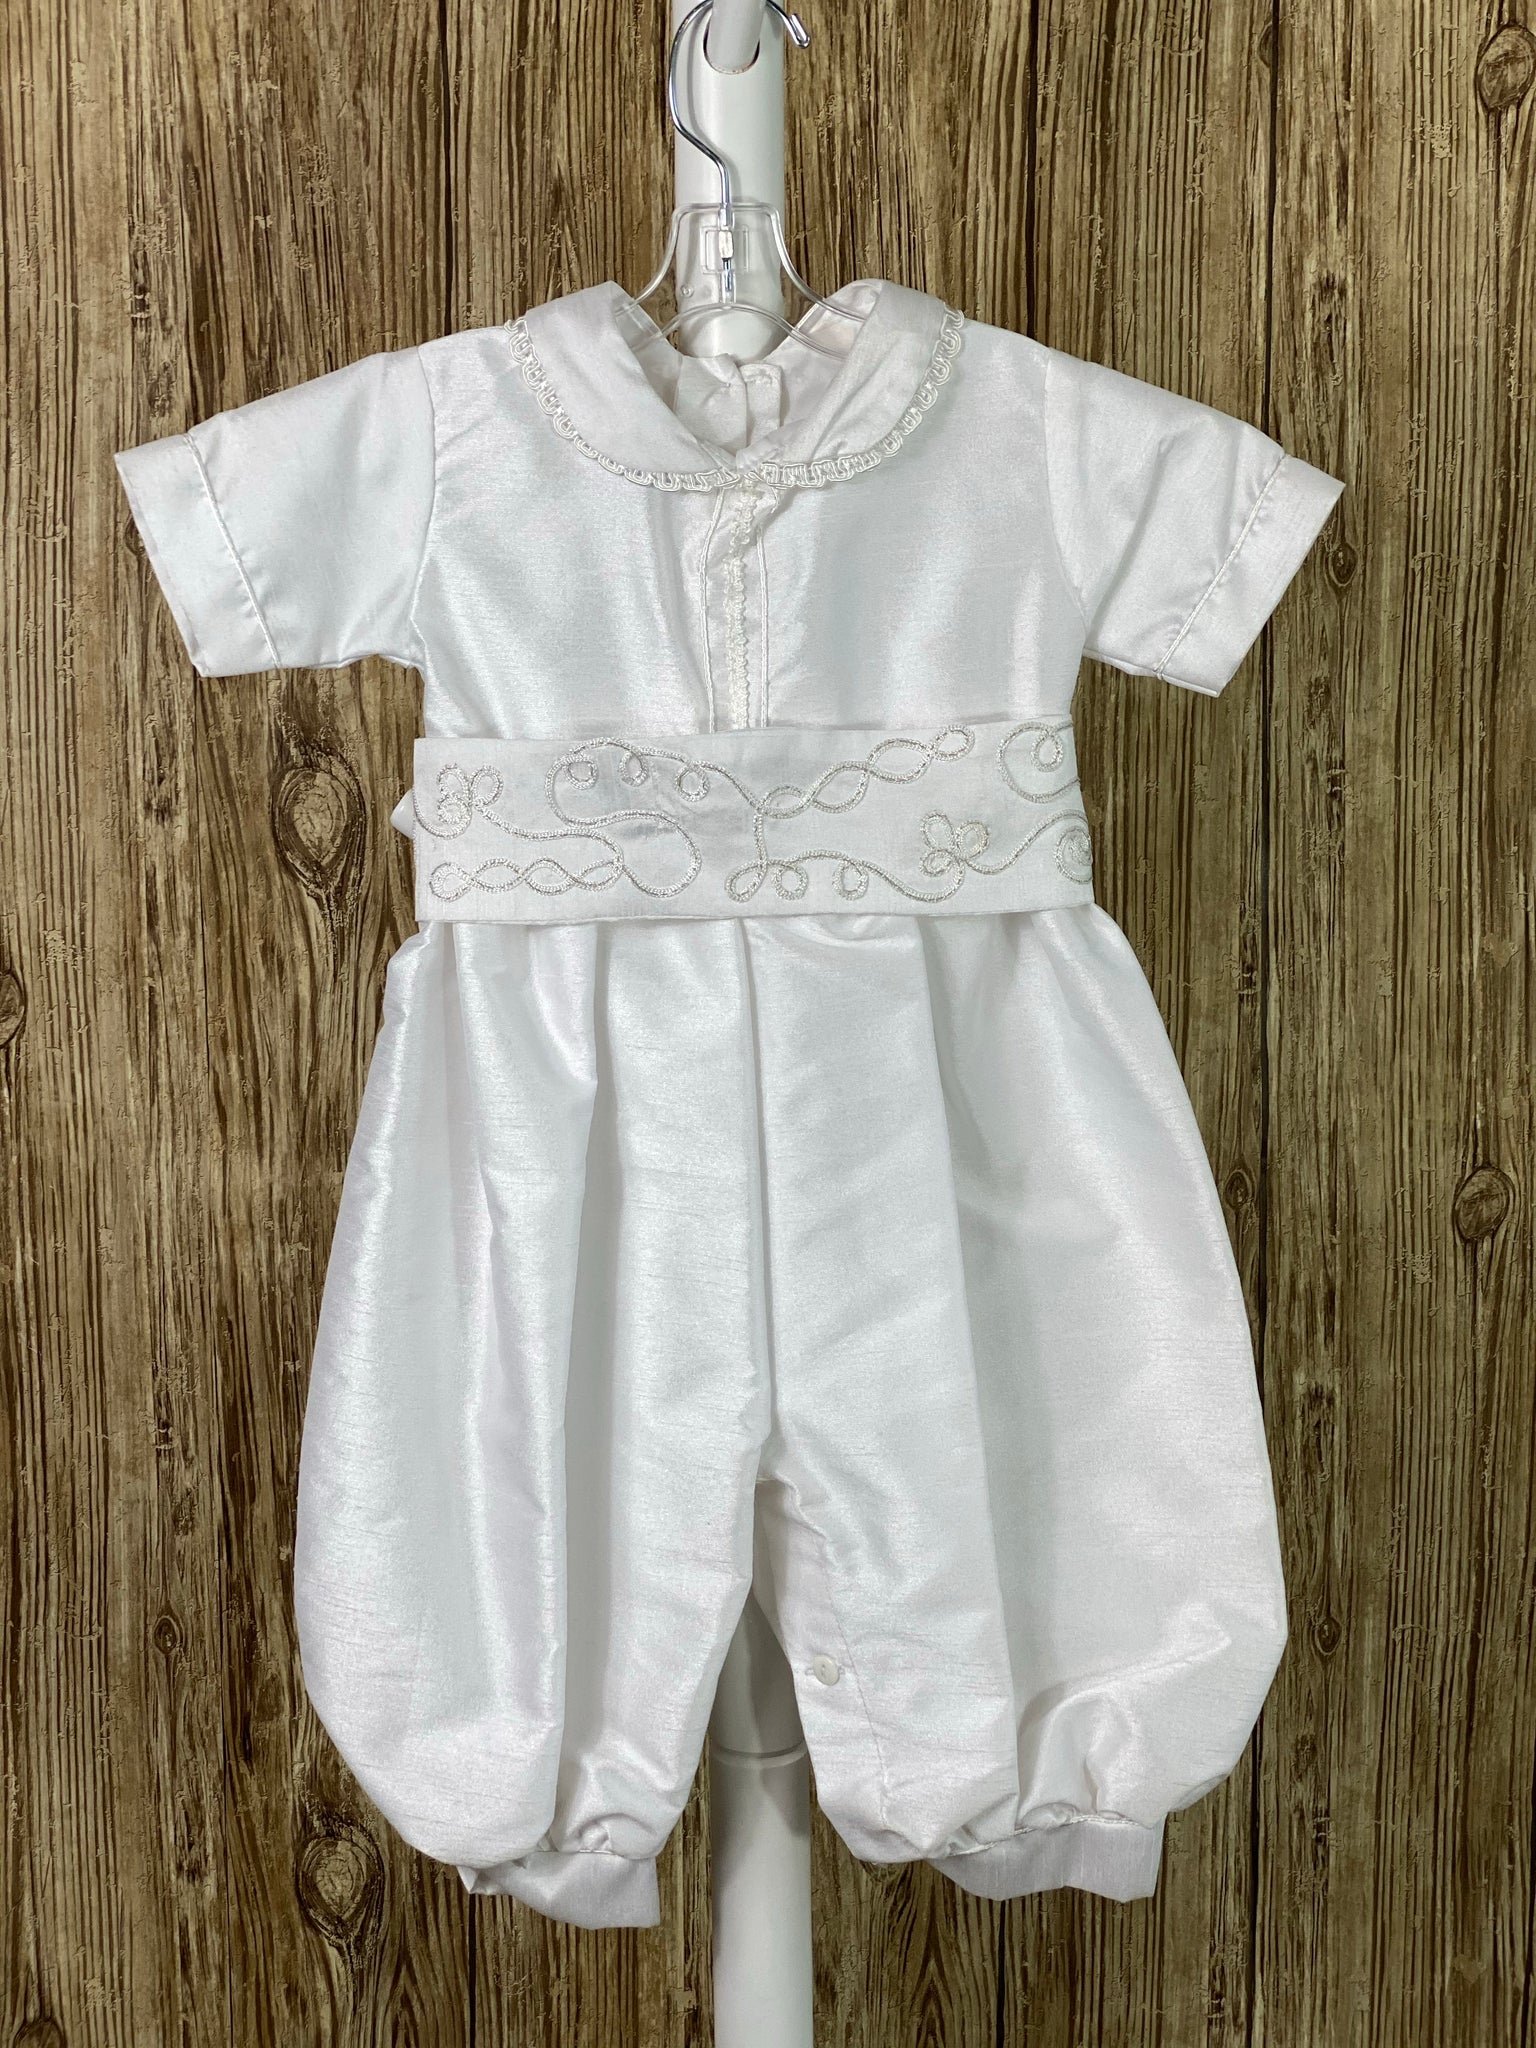 This a beautiful, one-of-a-kind boy’s baptism gown/set.  Lovely clothes for a precious child.  White, size 12M 4-piece set including beret, romper, belt, and mozzetta Buttoning on cuffs Collared with short sleeves Buttoning on back of romper and inside seam of legs Simple satin romper with very thin trim along cuffs and down center of bodice Braided trim swirled around belt and mozzetta Braided rope closure on mozzetta